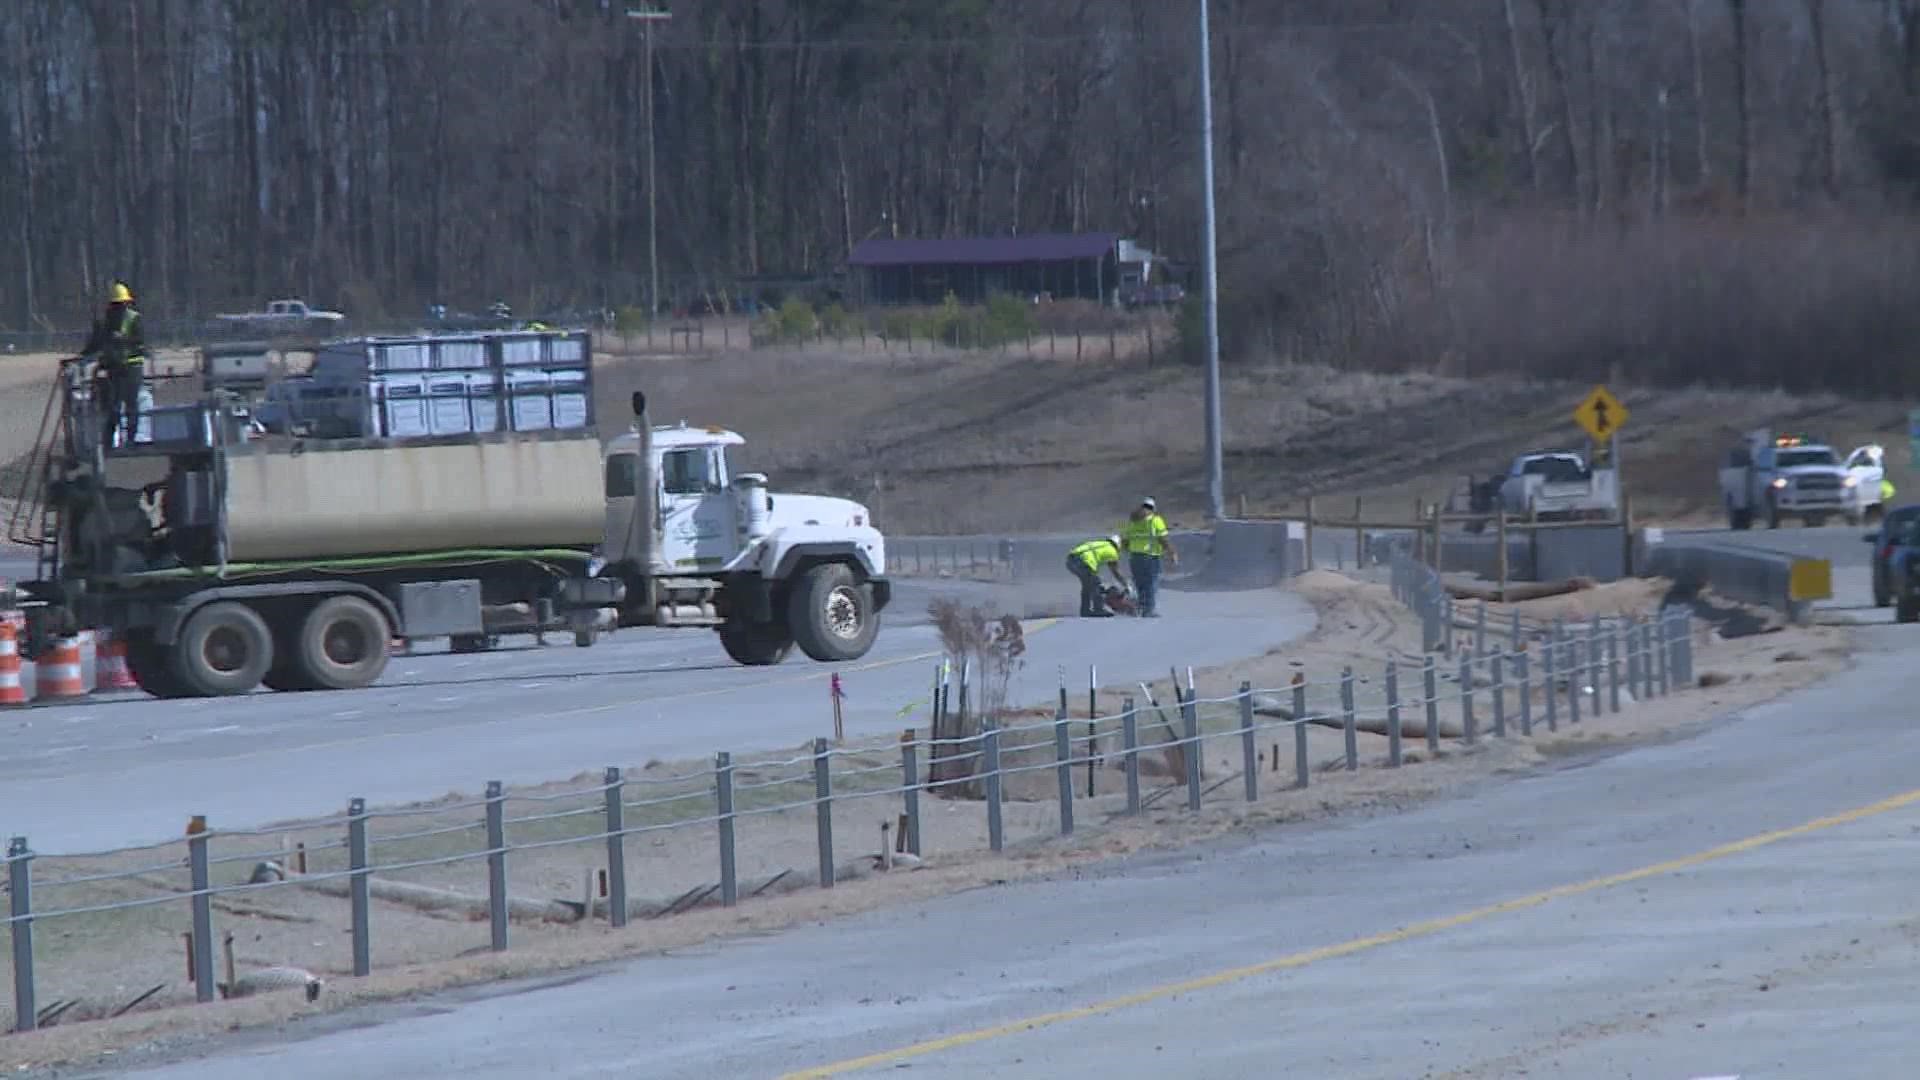 The final section of the Urban Loop encompassing Greensboro is slated to open Monday, Jan. 23.